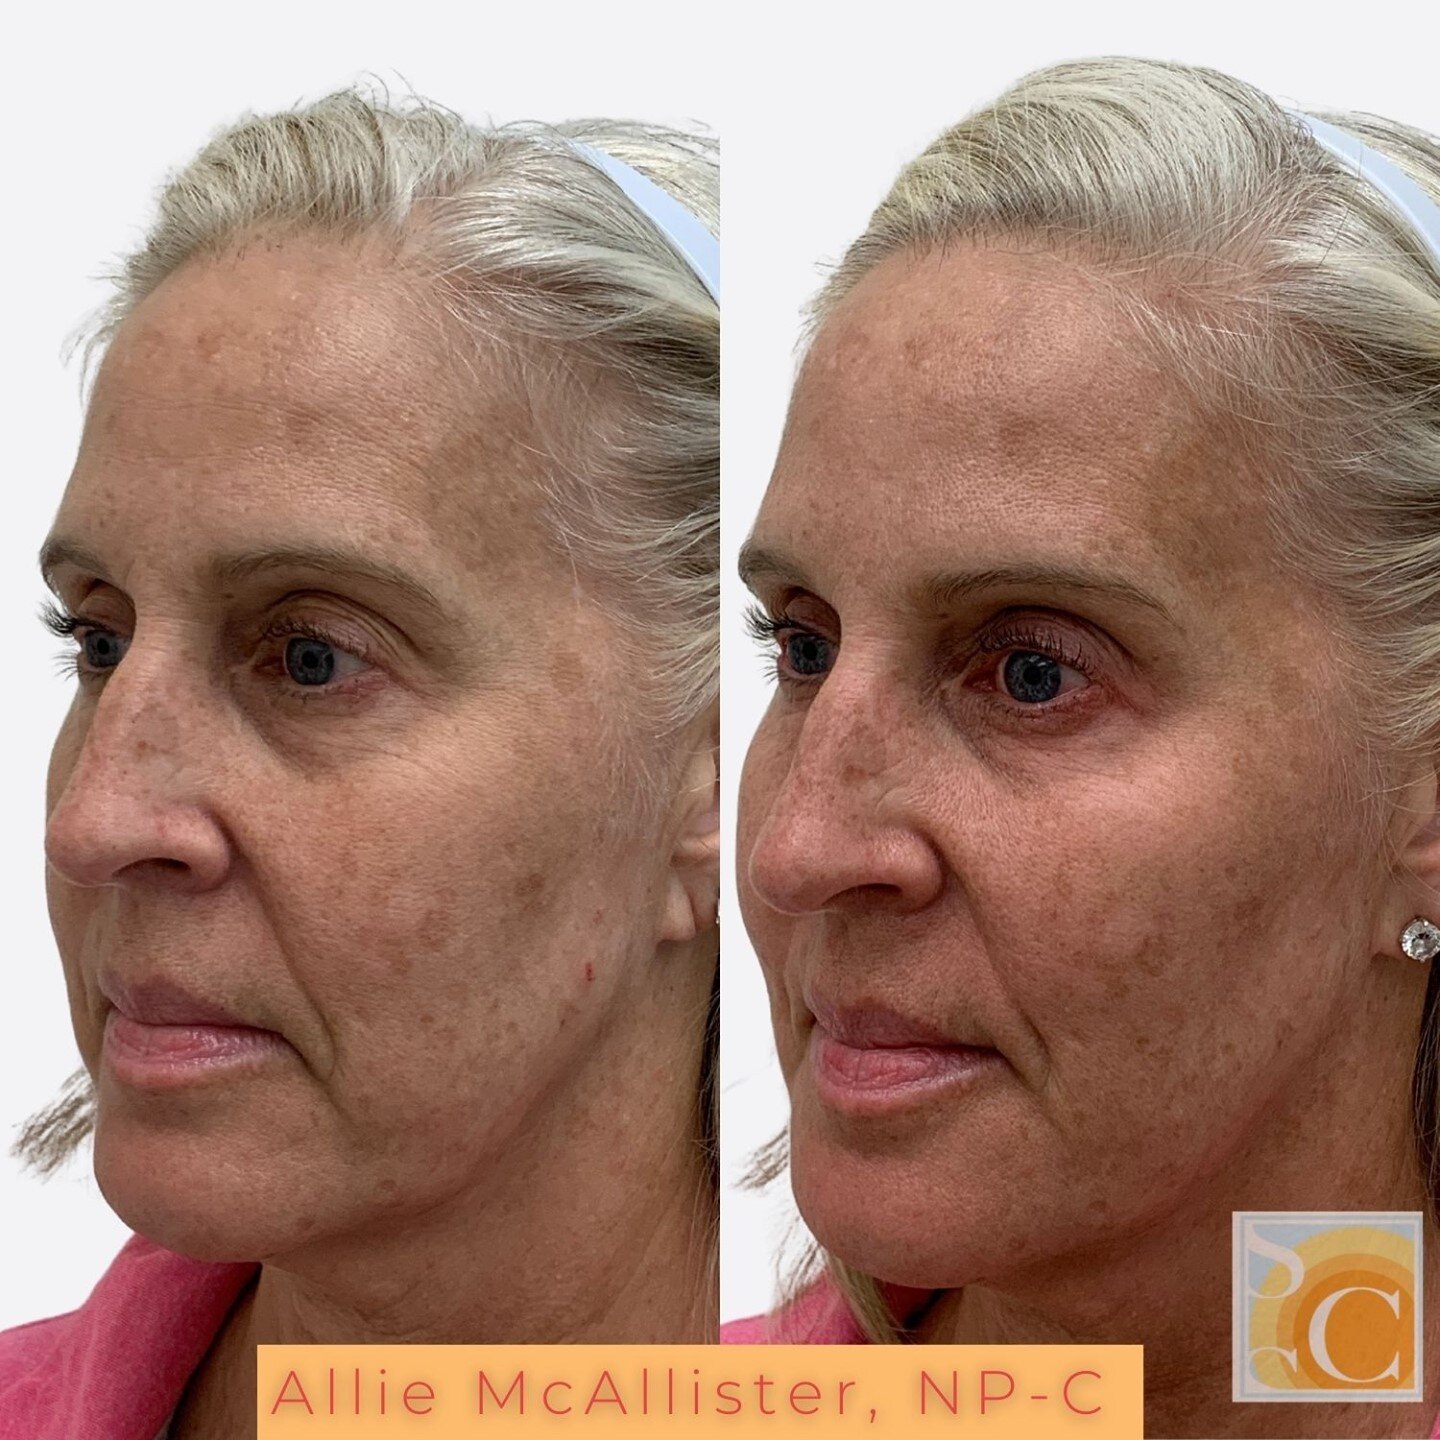 Facial Balancing for the win! Again! ⁠
⁠
Expecting 1 syringe of filler to improve global aging is like running 1 mile and expecting to lose 10 pounds. When patients trust their provider we get impactful results! ⁠This is a result with three syringes 